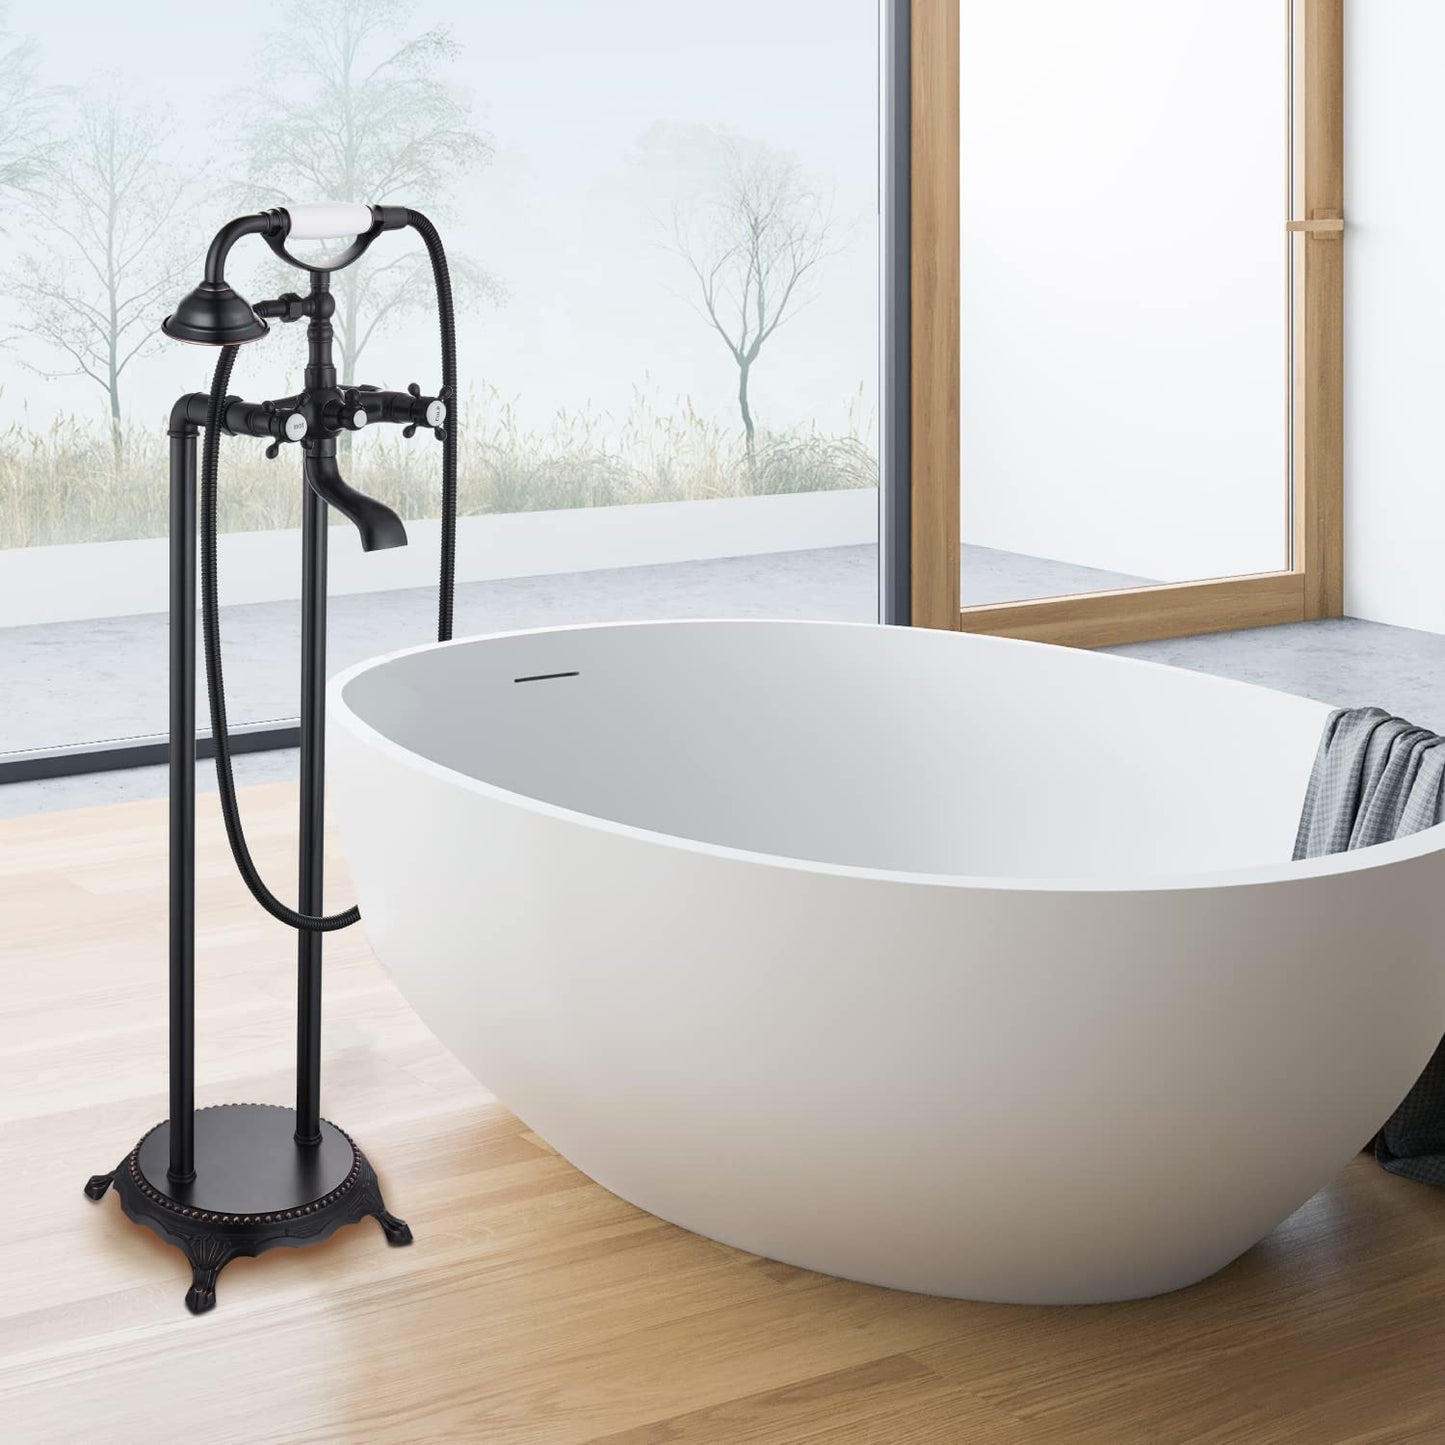 
                  
                    Floor Mounted Bathtub Freestanding Faucet Tub Filler With Handheld Shower Spray Double Cross Knobs Telephone Shape High Flow Bathroom Mixing Tap
                  
                